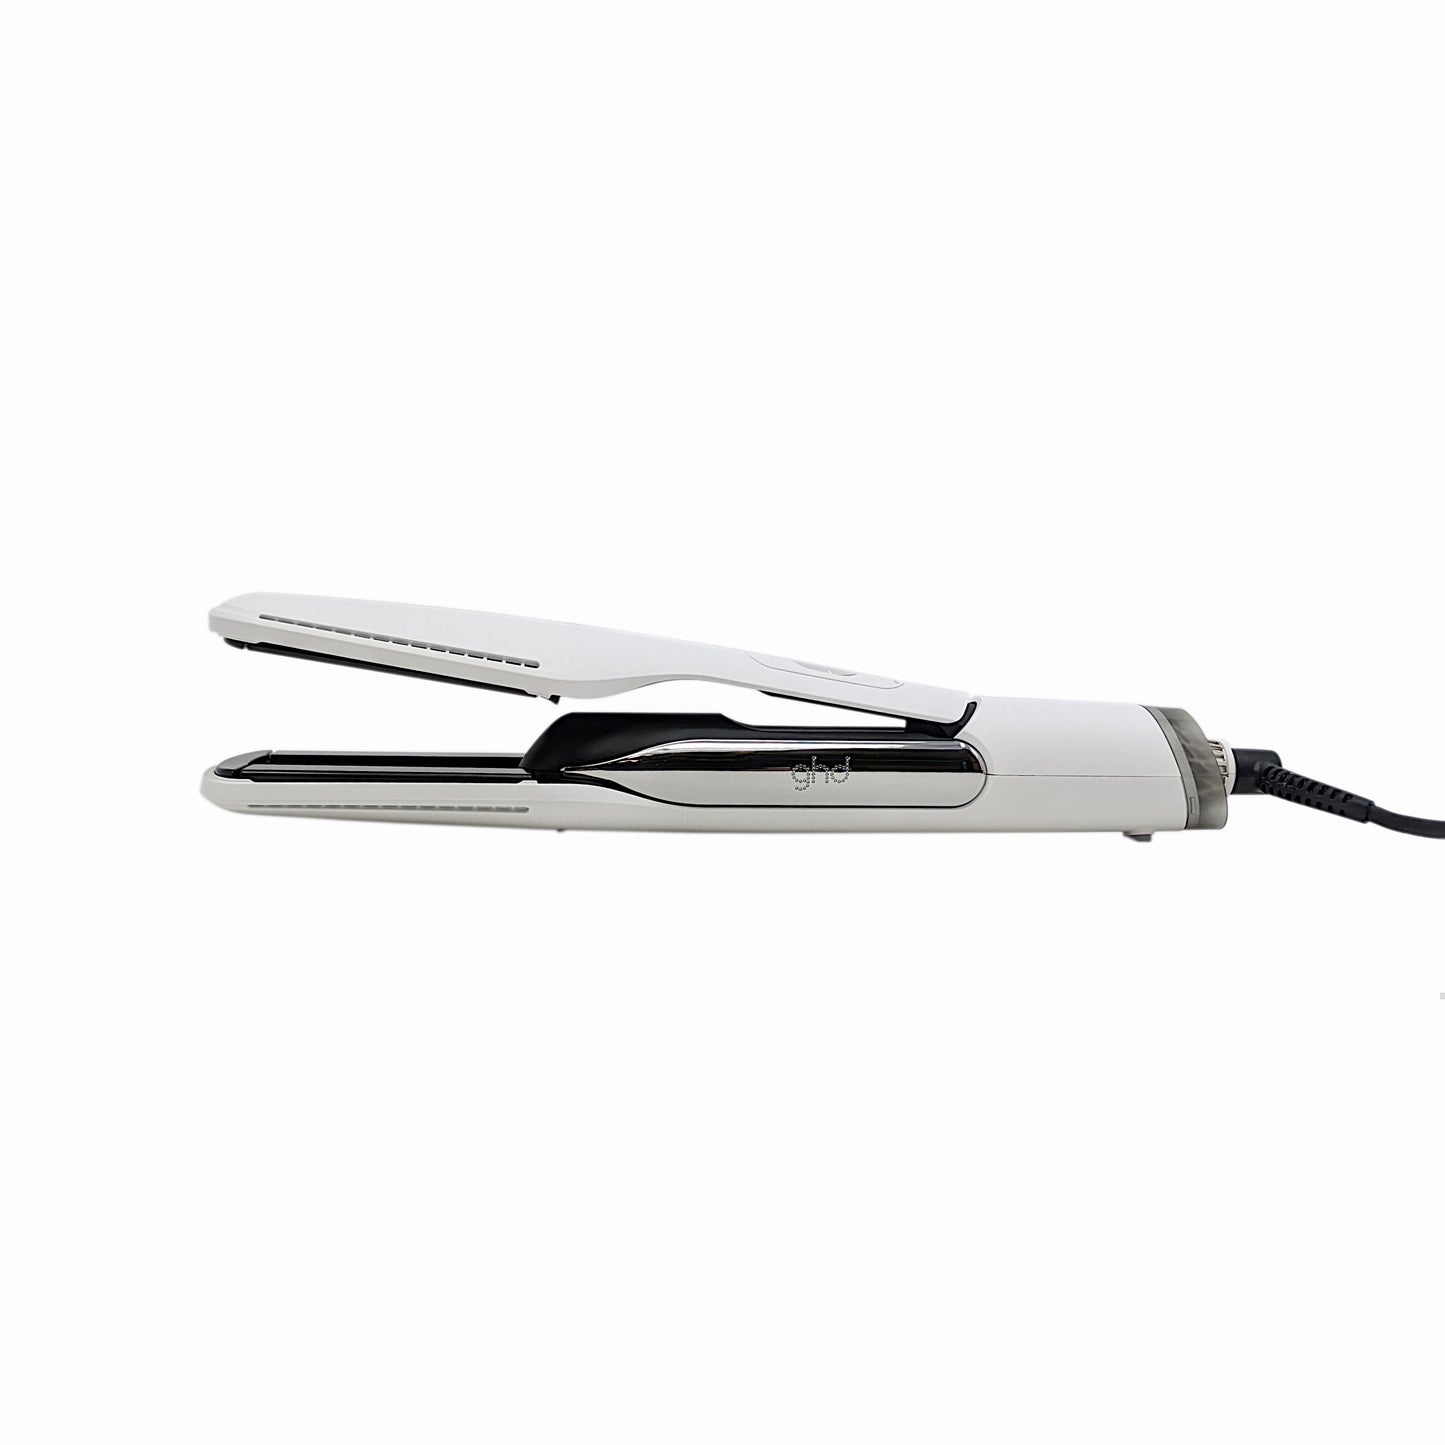 ghd Duet Style Pro 2-in-1 Hot Air Styler White - Ex Display Imperfect Box